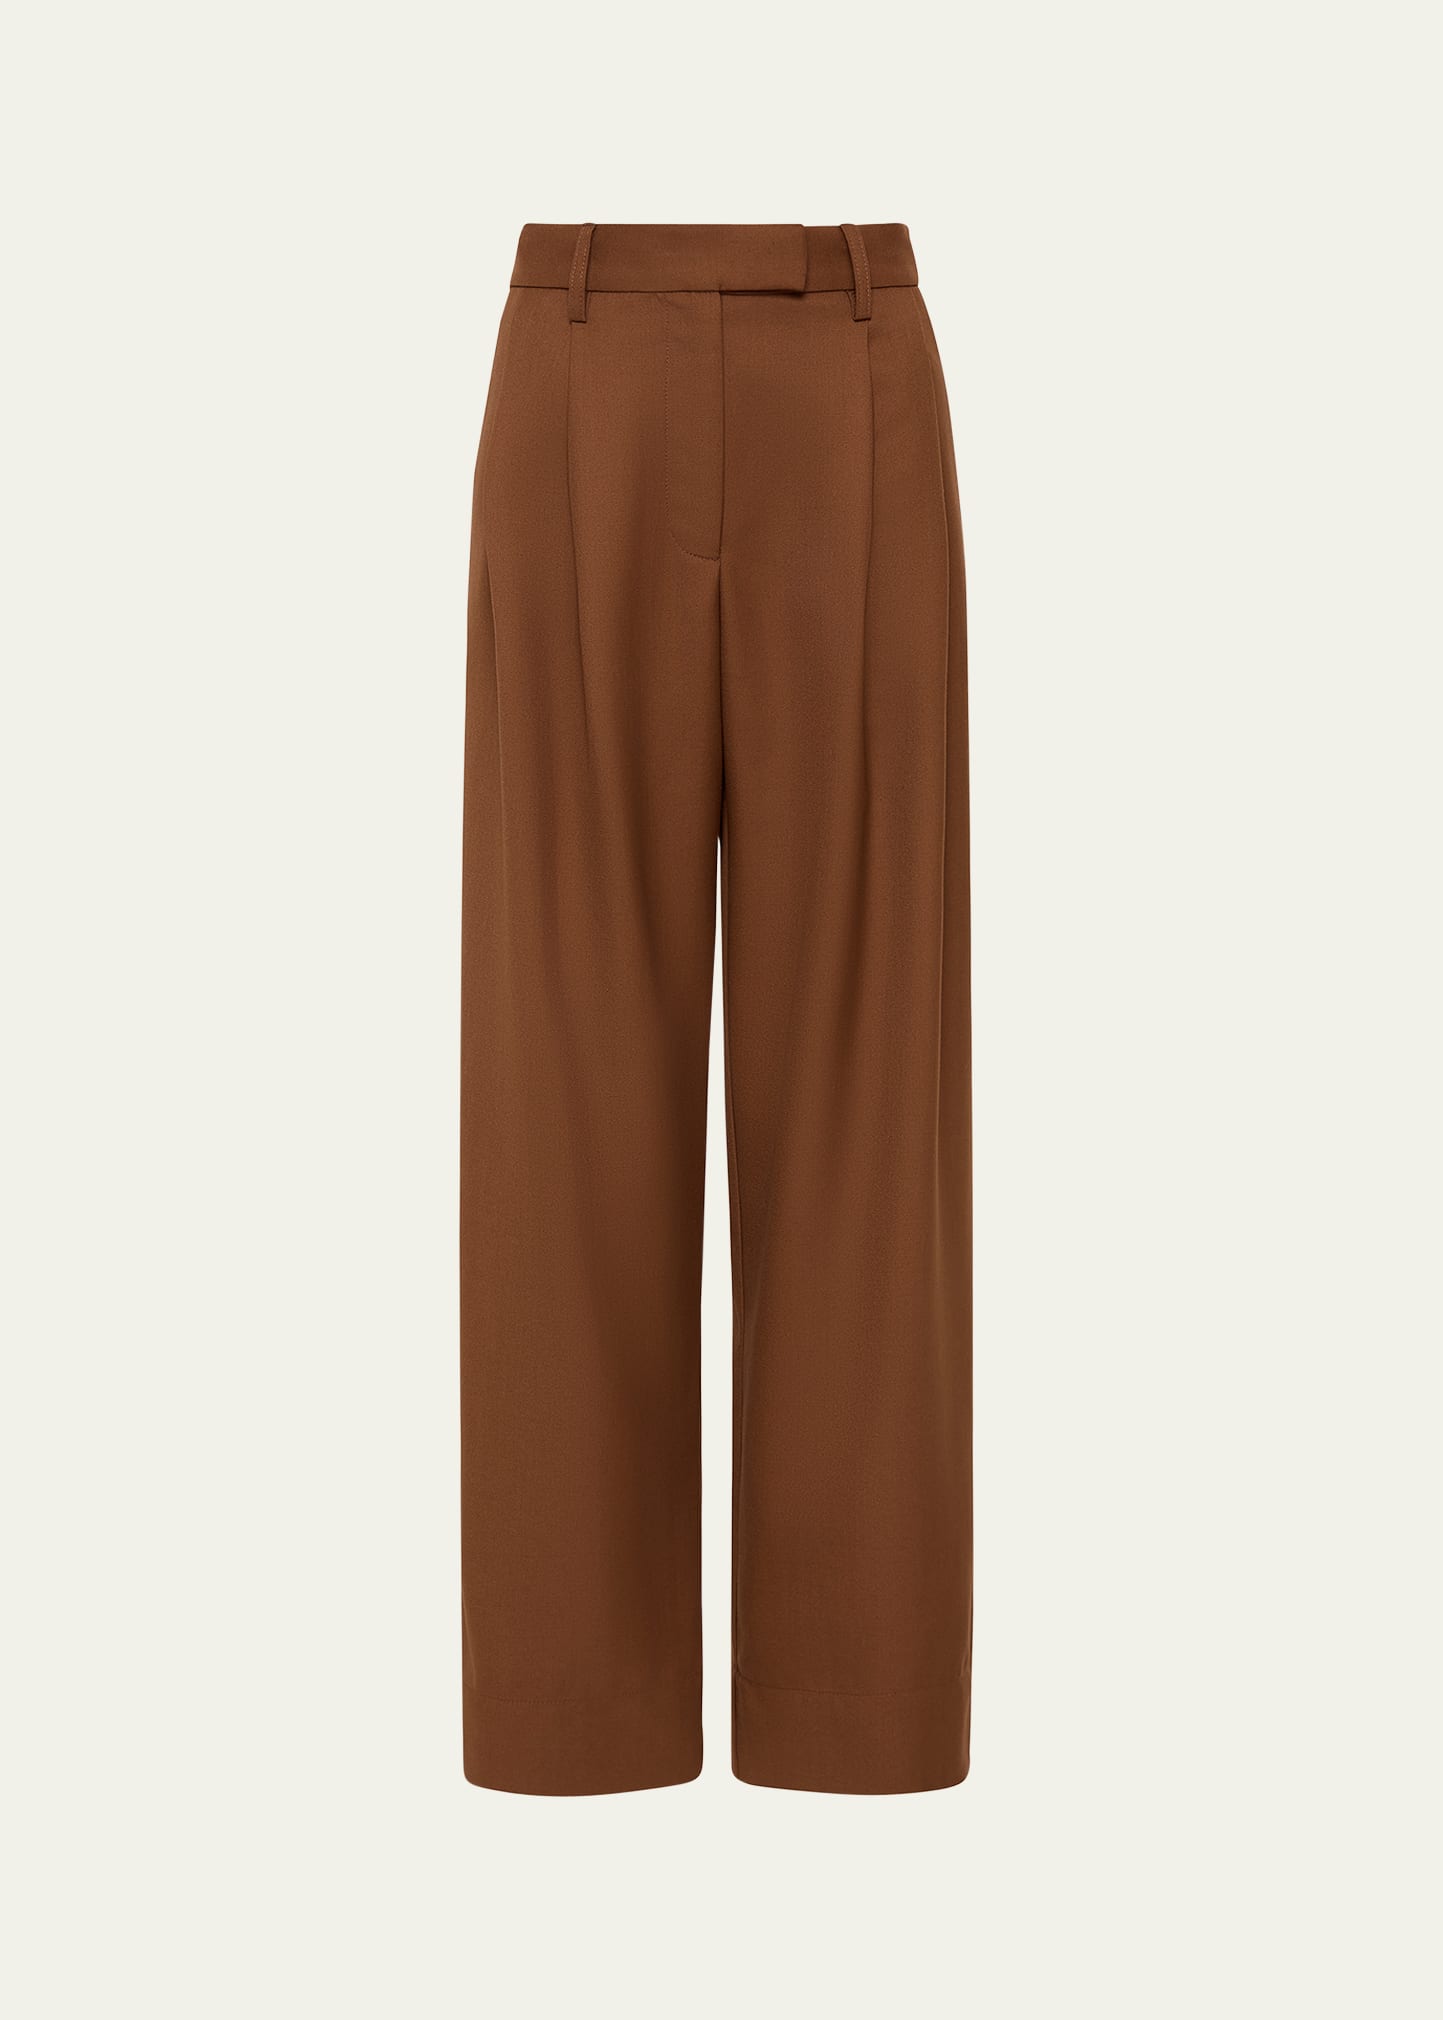 Classico Tailored Wool Trousers